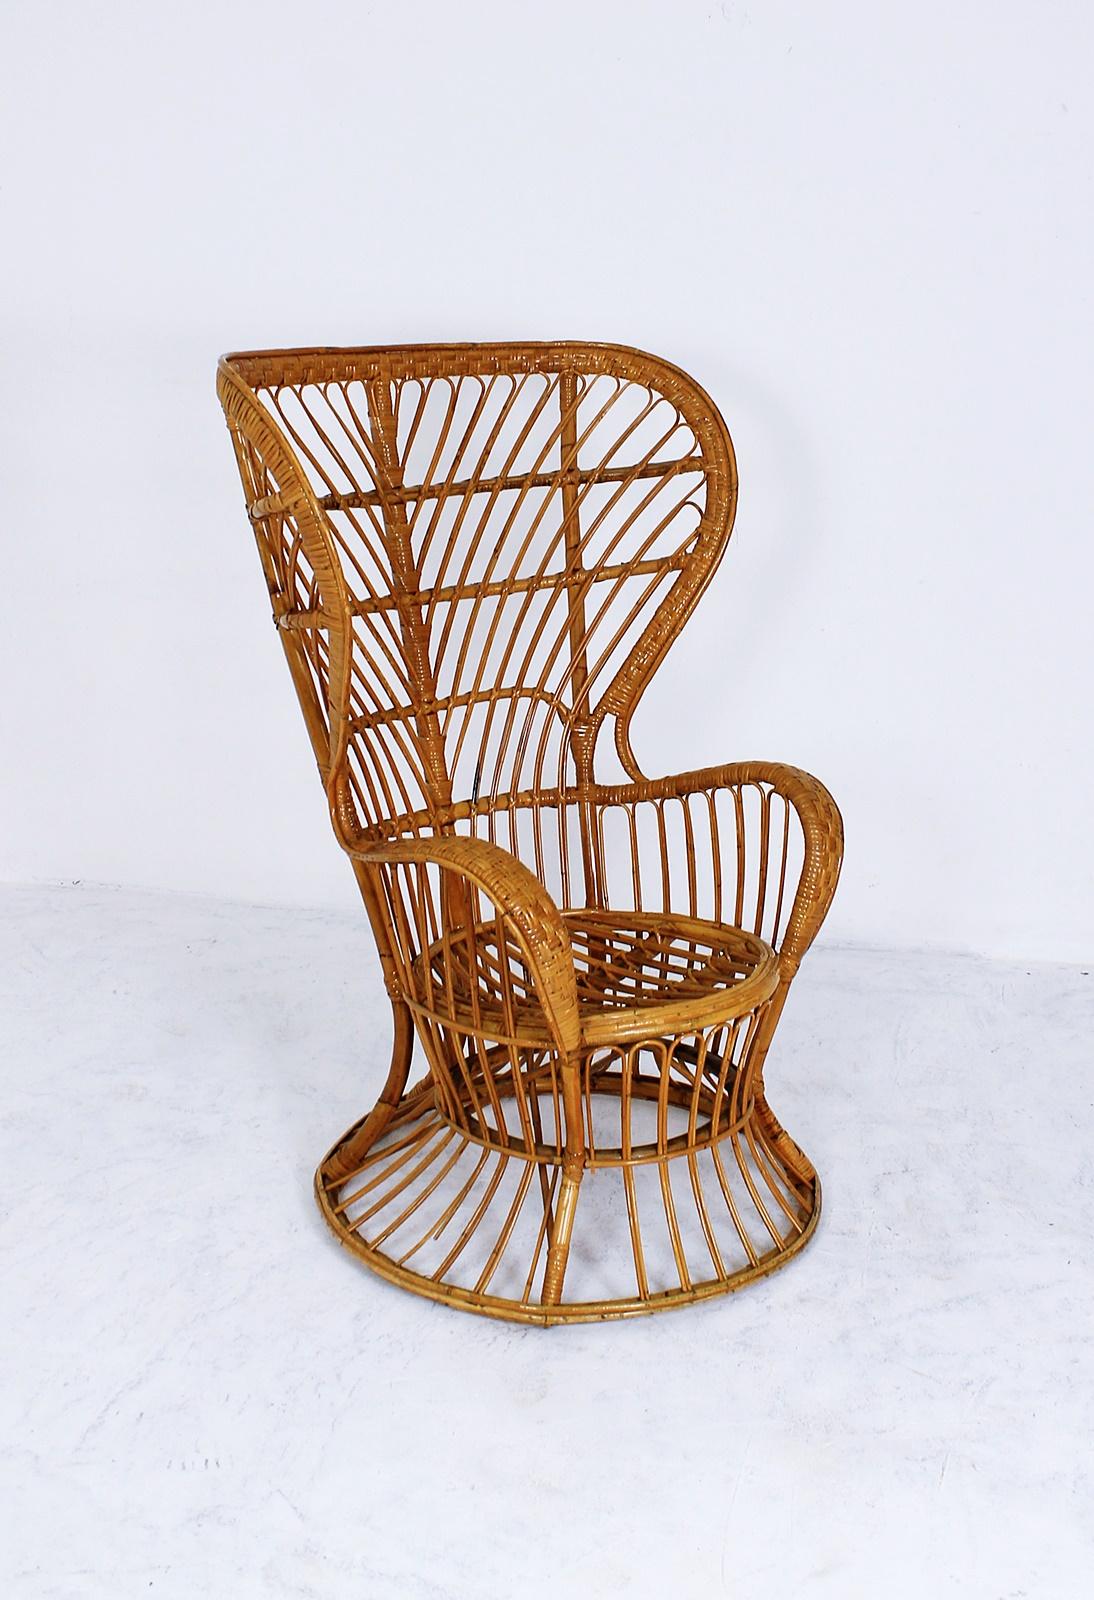 This Italian handcrafted midcentury rattan high back armchair was designed by Lio Carminati in the 1950s and manufactured by Pierantonio Bonacina. The item was specifically designed for the cruise ship Conte Biancamano.

Wear consistent with age and